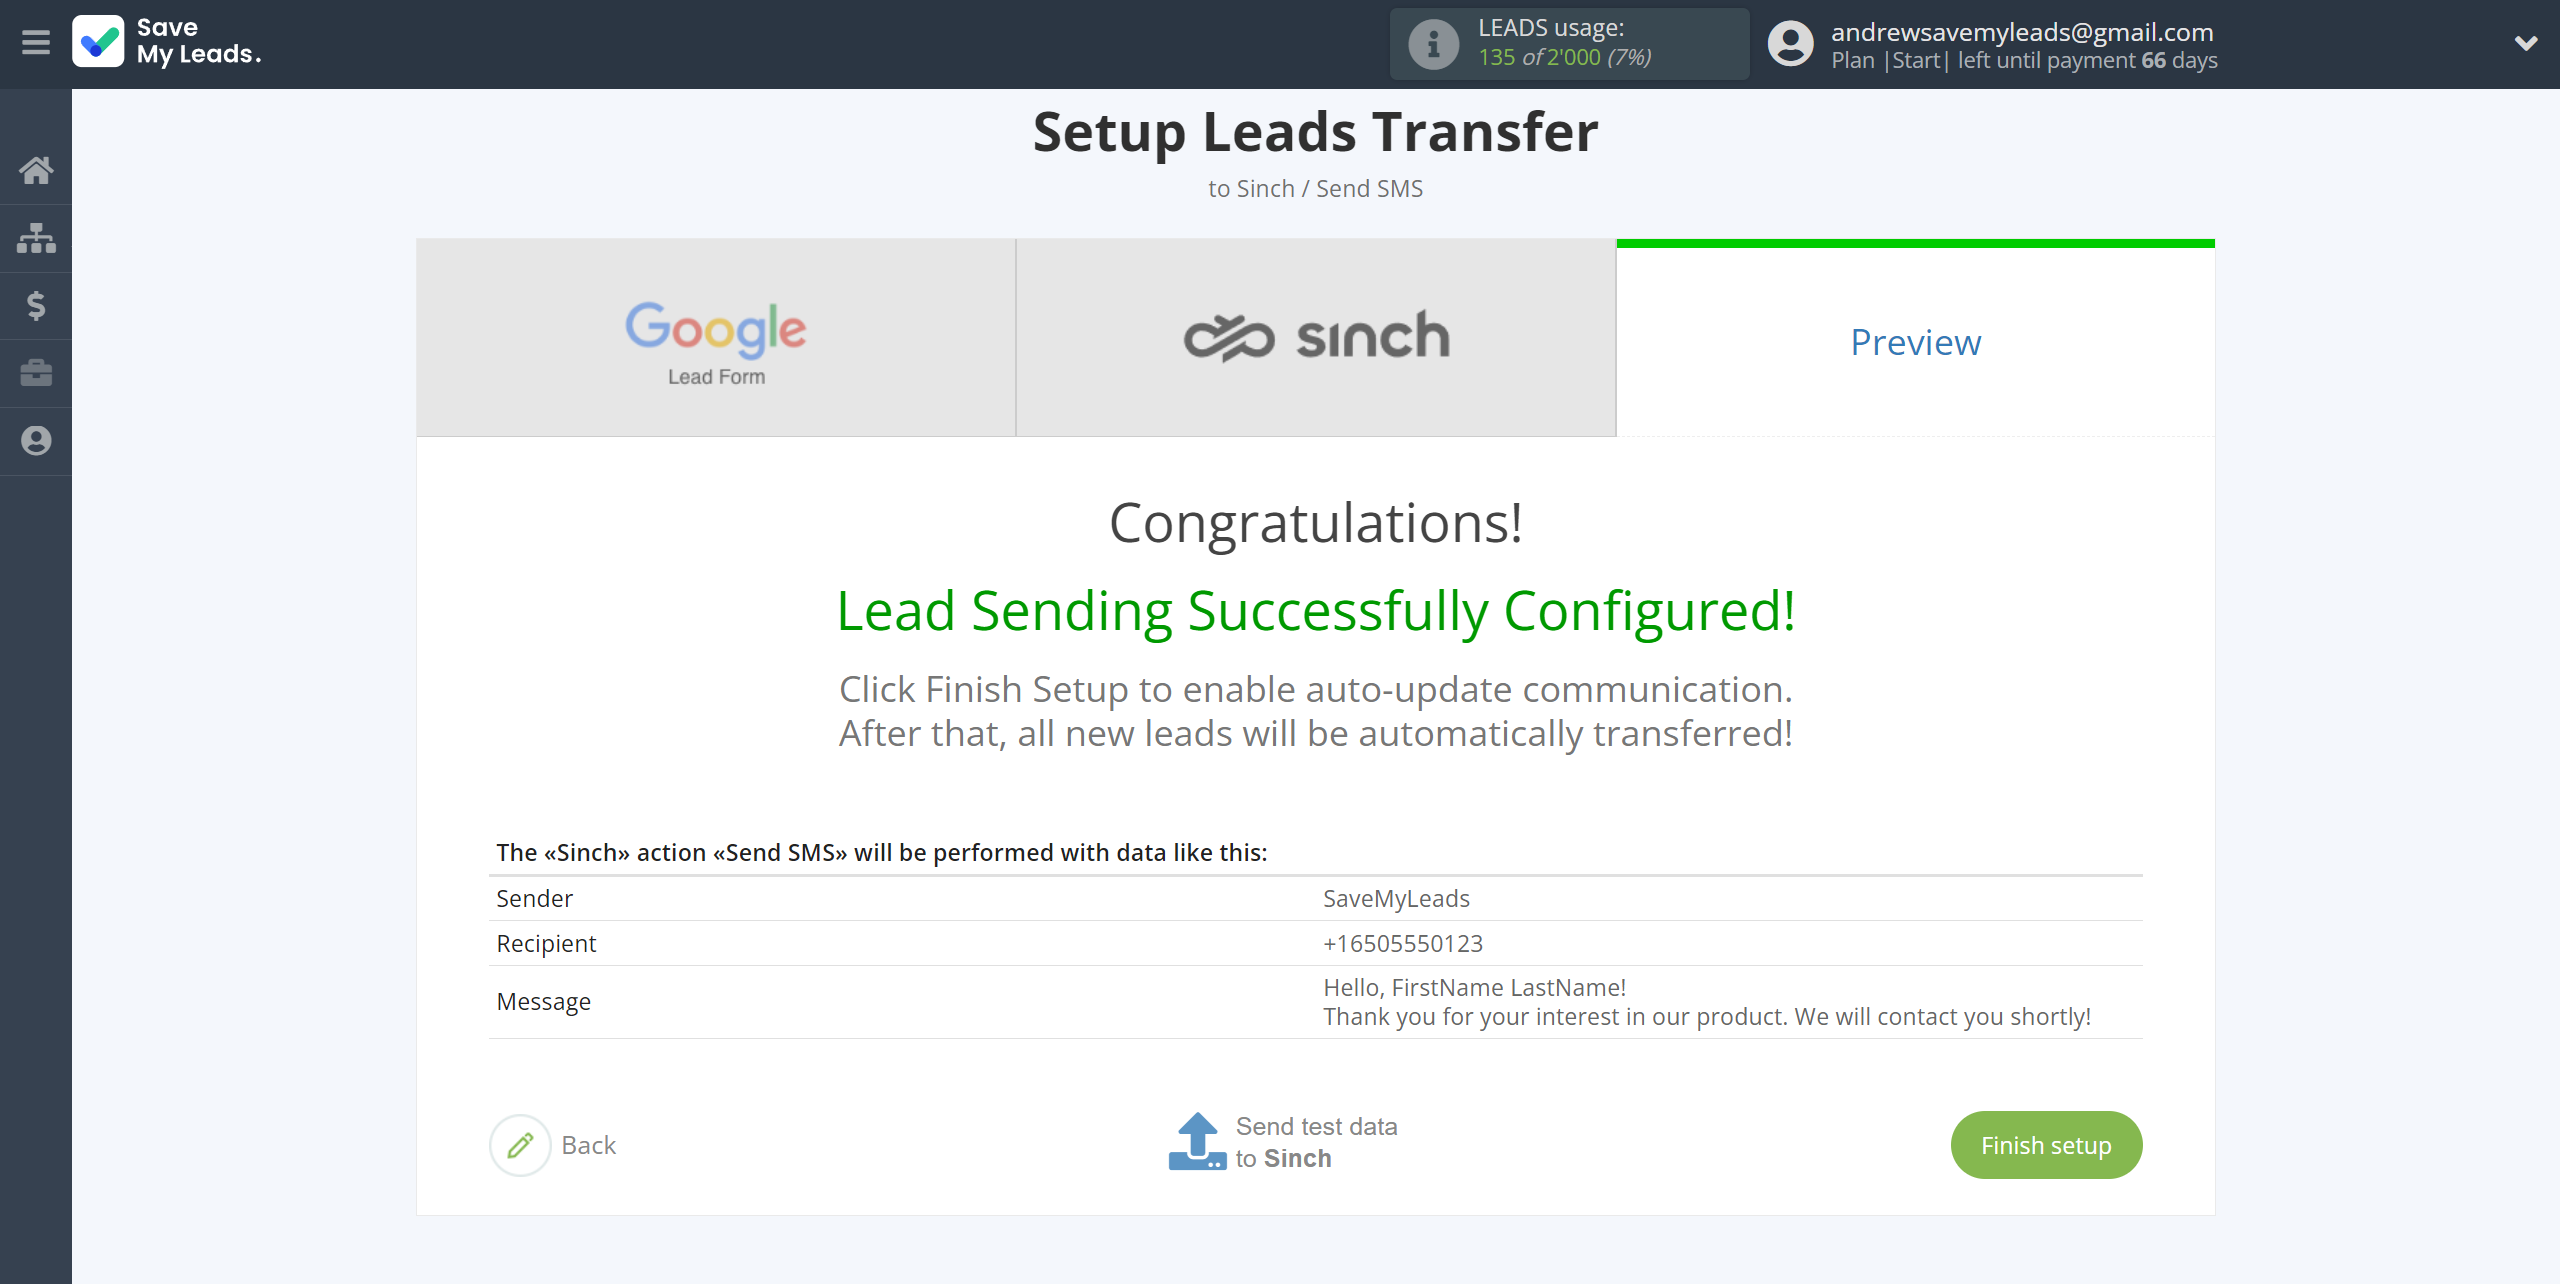 How to Connect Google Lead Form with Sinch | Test data